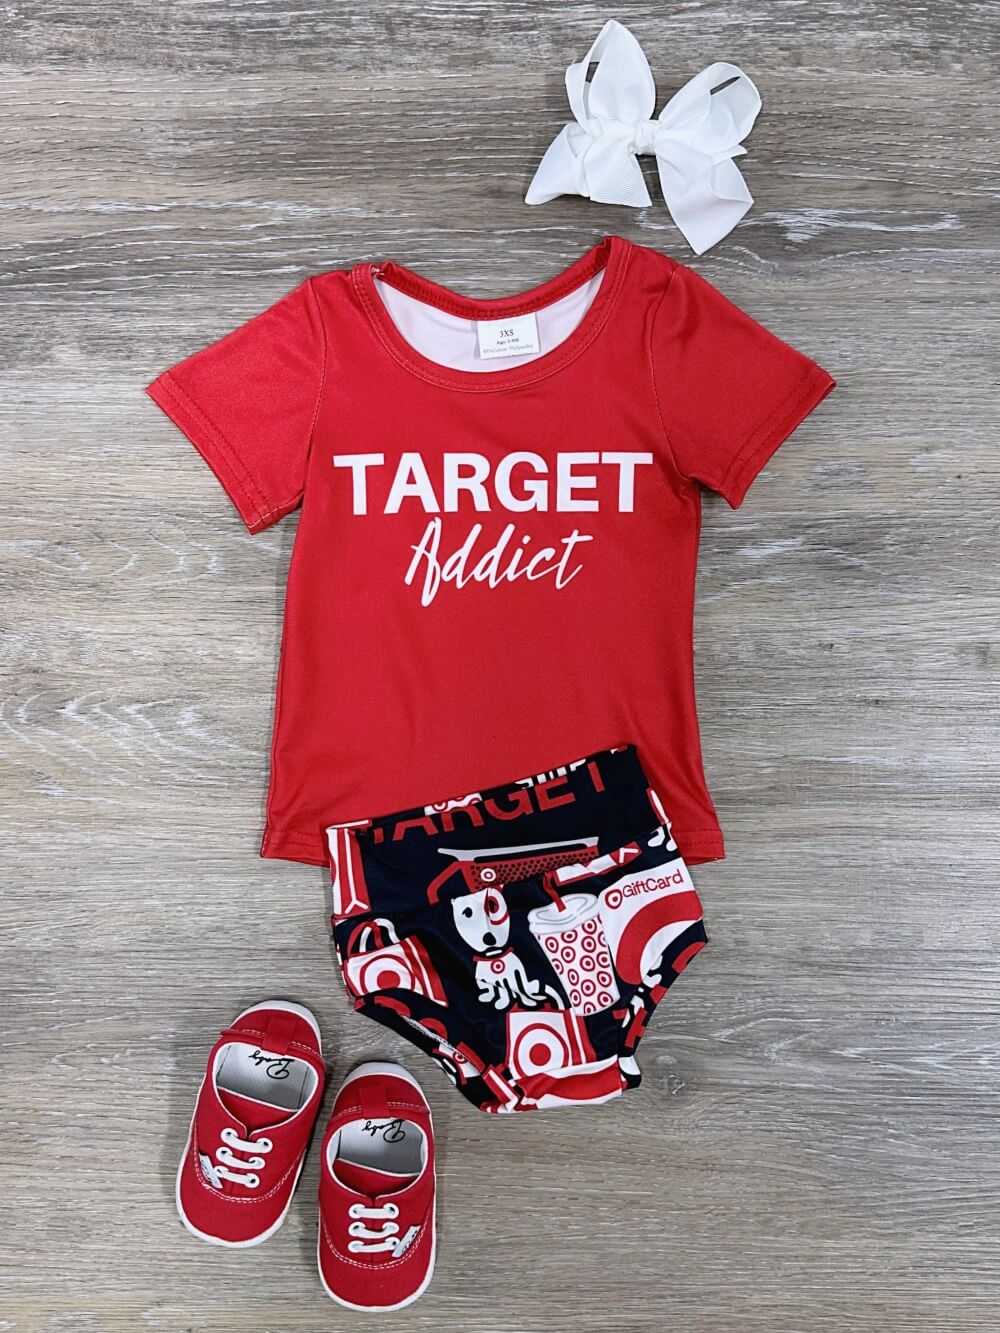 Target Addict Baby Top & Bummies Outfit - Sydney So Sweet